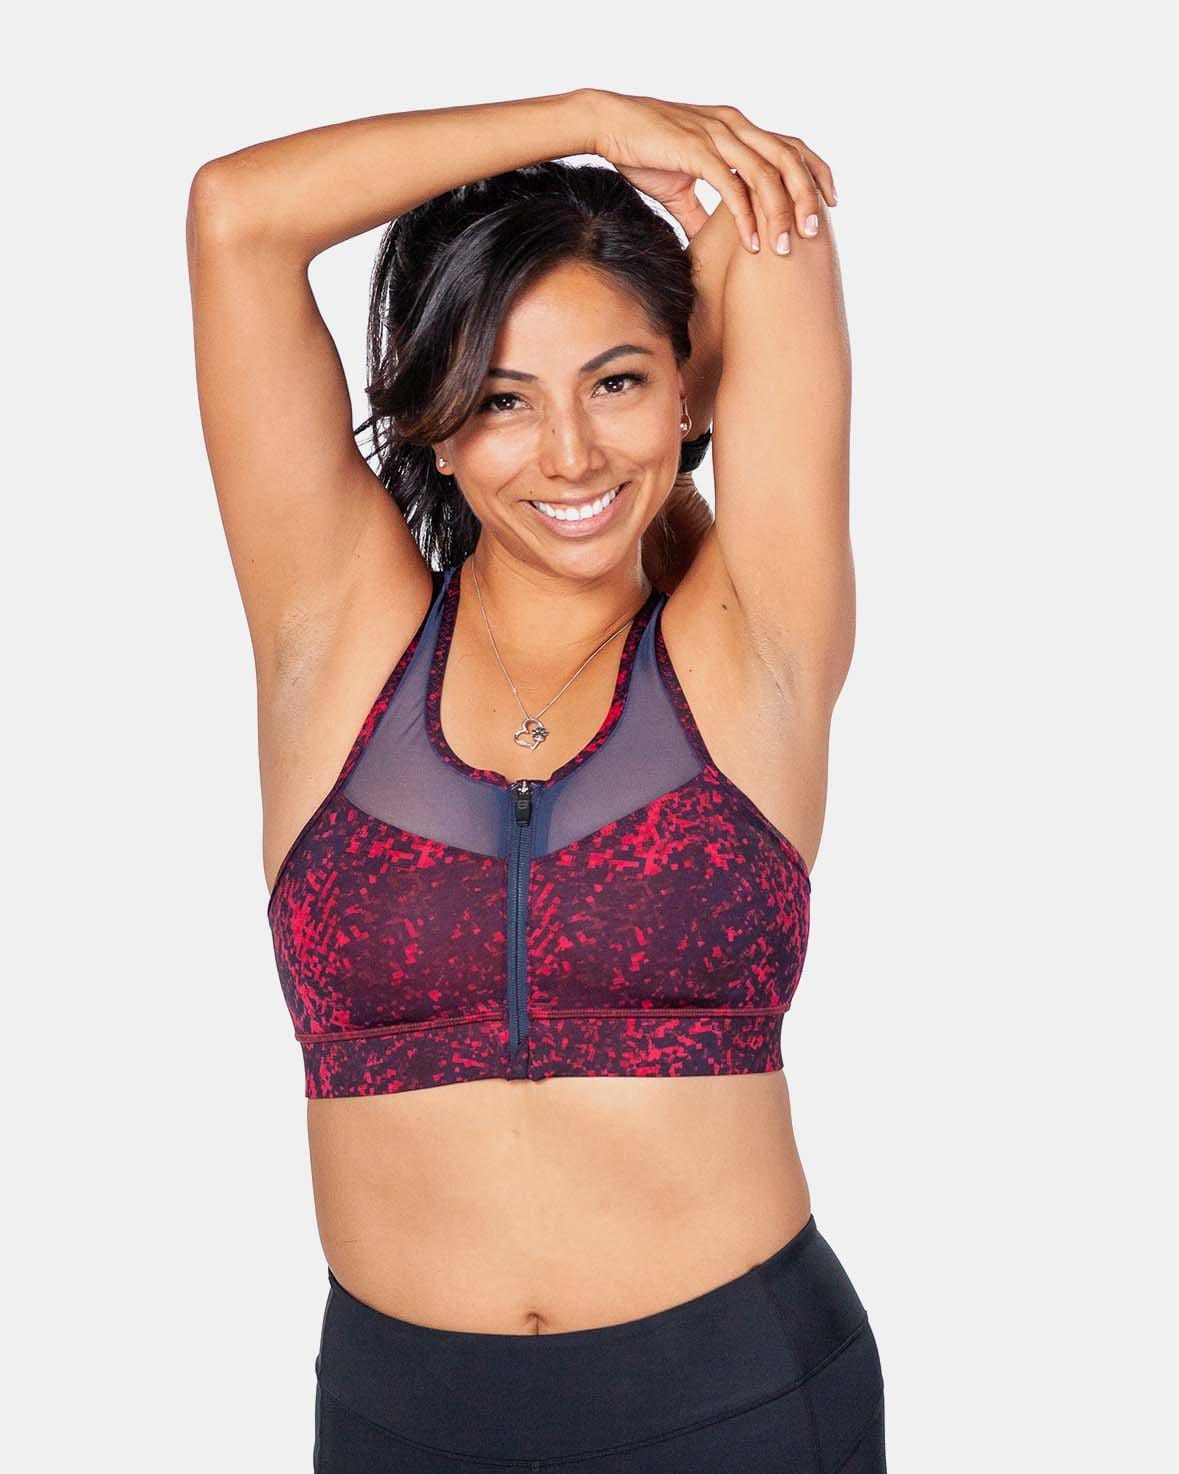 Handful The Closer, Womens Front Closure Sports Bra with Front Zip